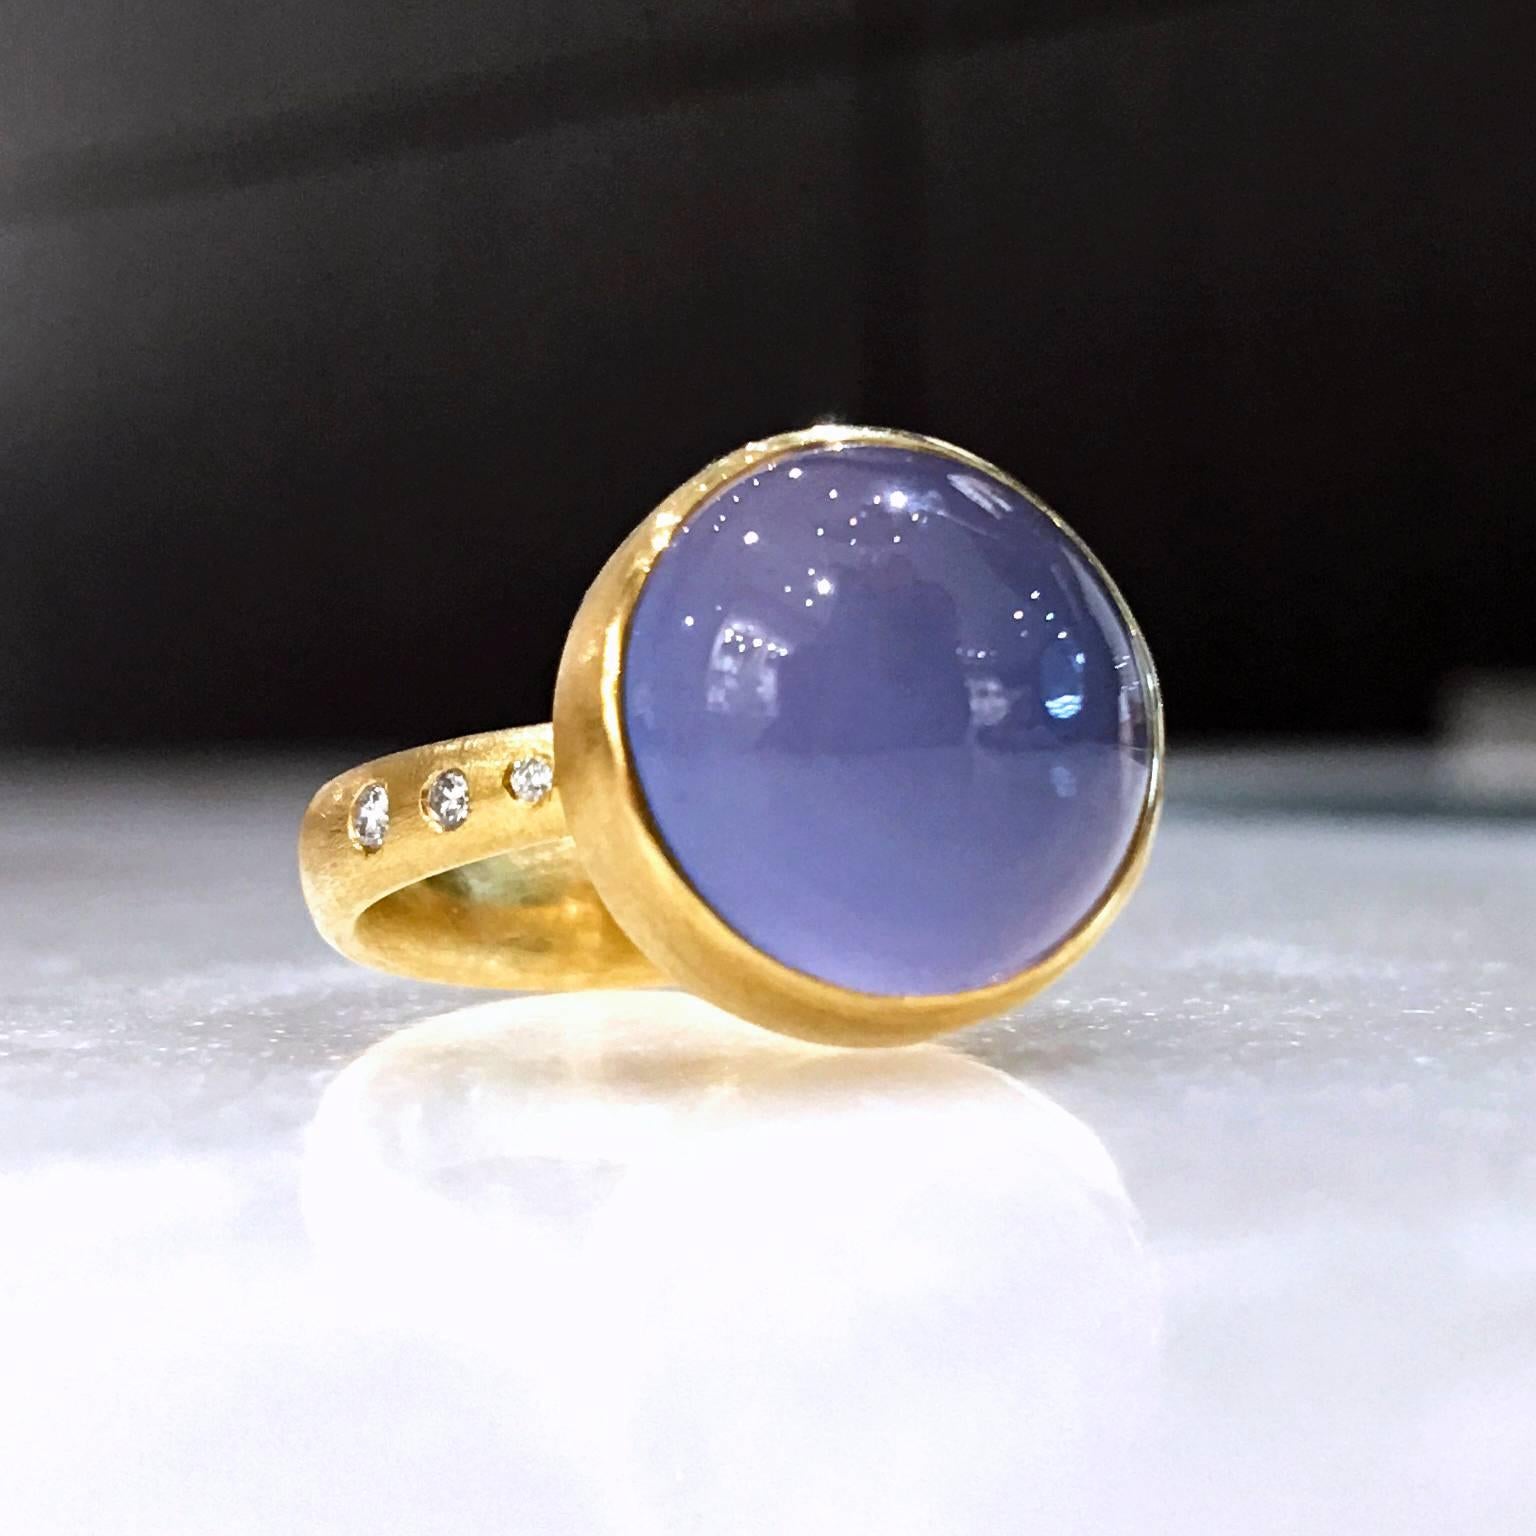 Bubble Ring by award winning jewelry artist Robin Waynee handcrafted in her signature matte finished 18k yellow gold with a bezel-set and cabochon-cut 6.02 carat chalcedony showcasing a phenomenon known as chatoyancy, an optical effect that produces